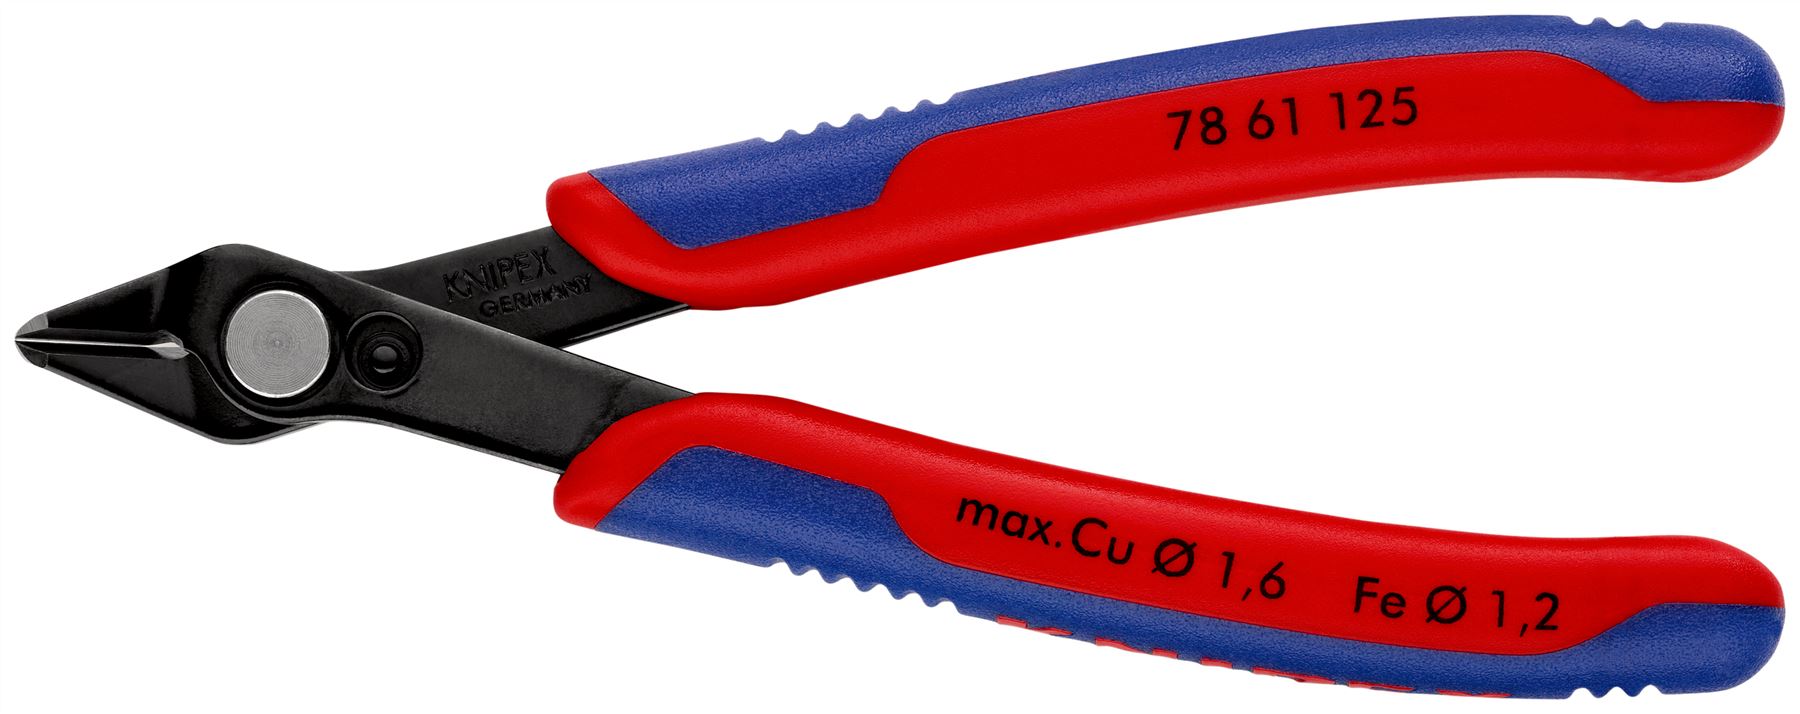 KNIPEX Electronics Super Knips Precision Cutting Pliers 125mm Multi Component Grips 78 61 125 SB